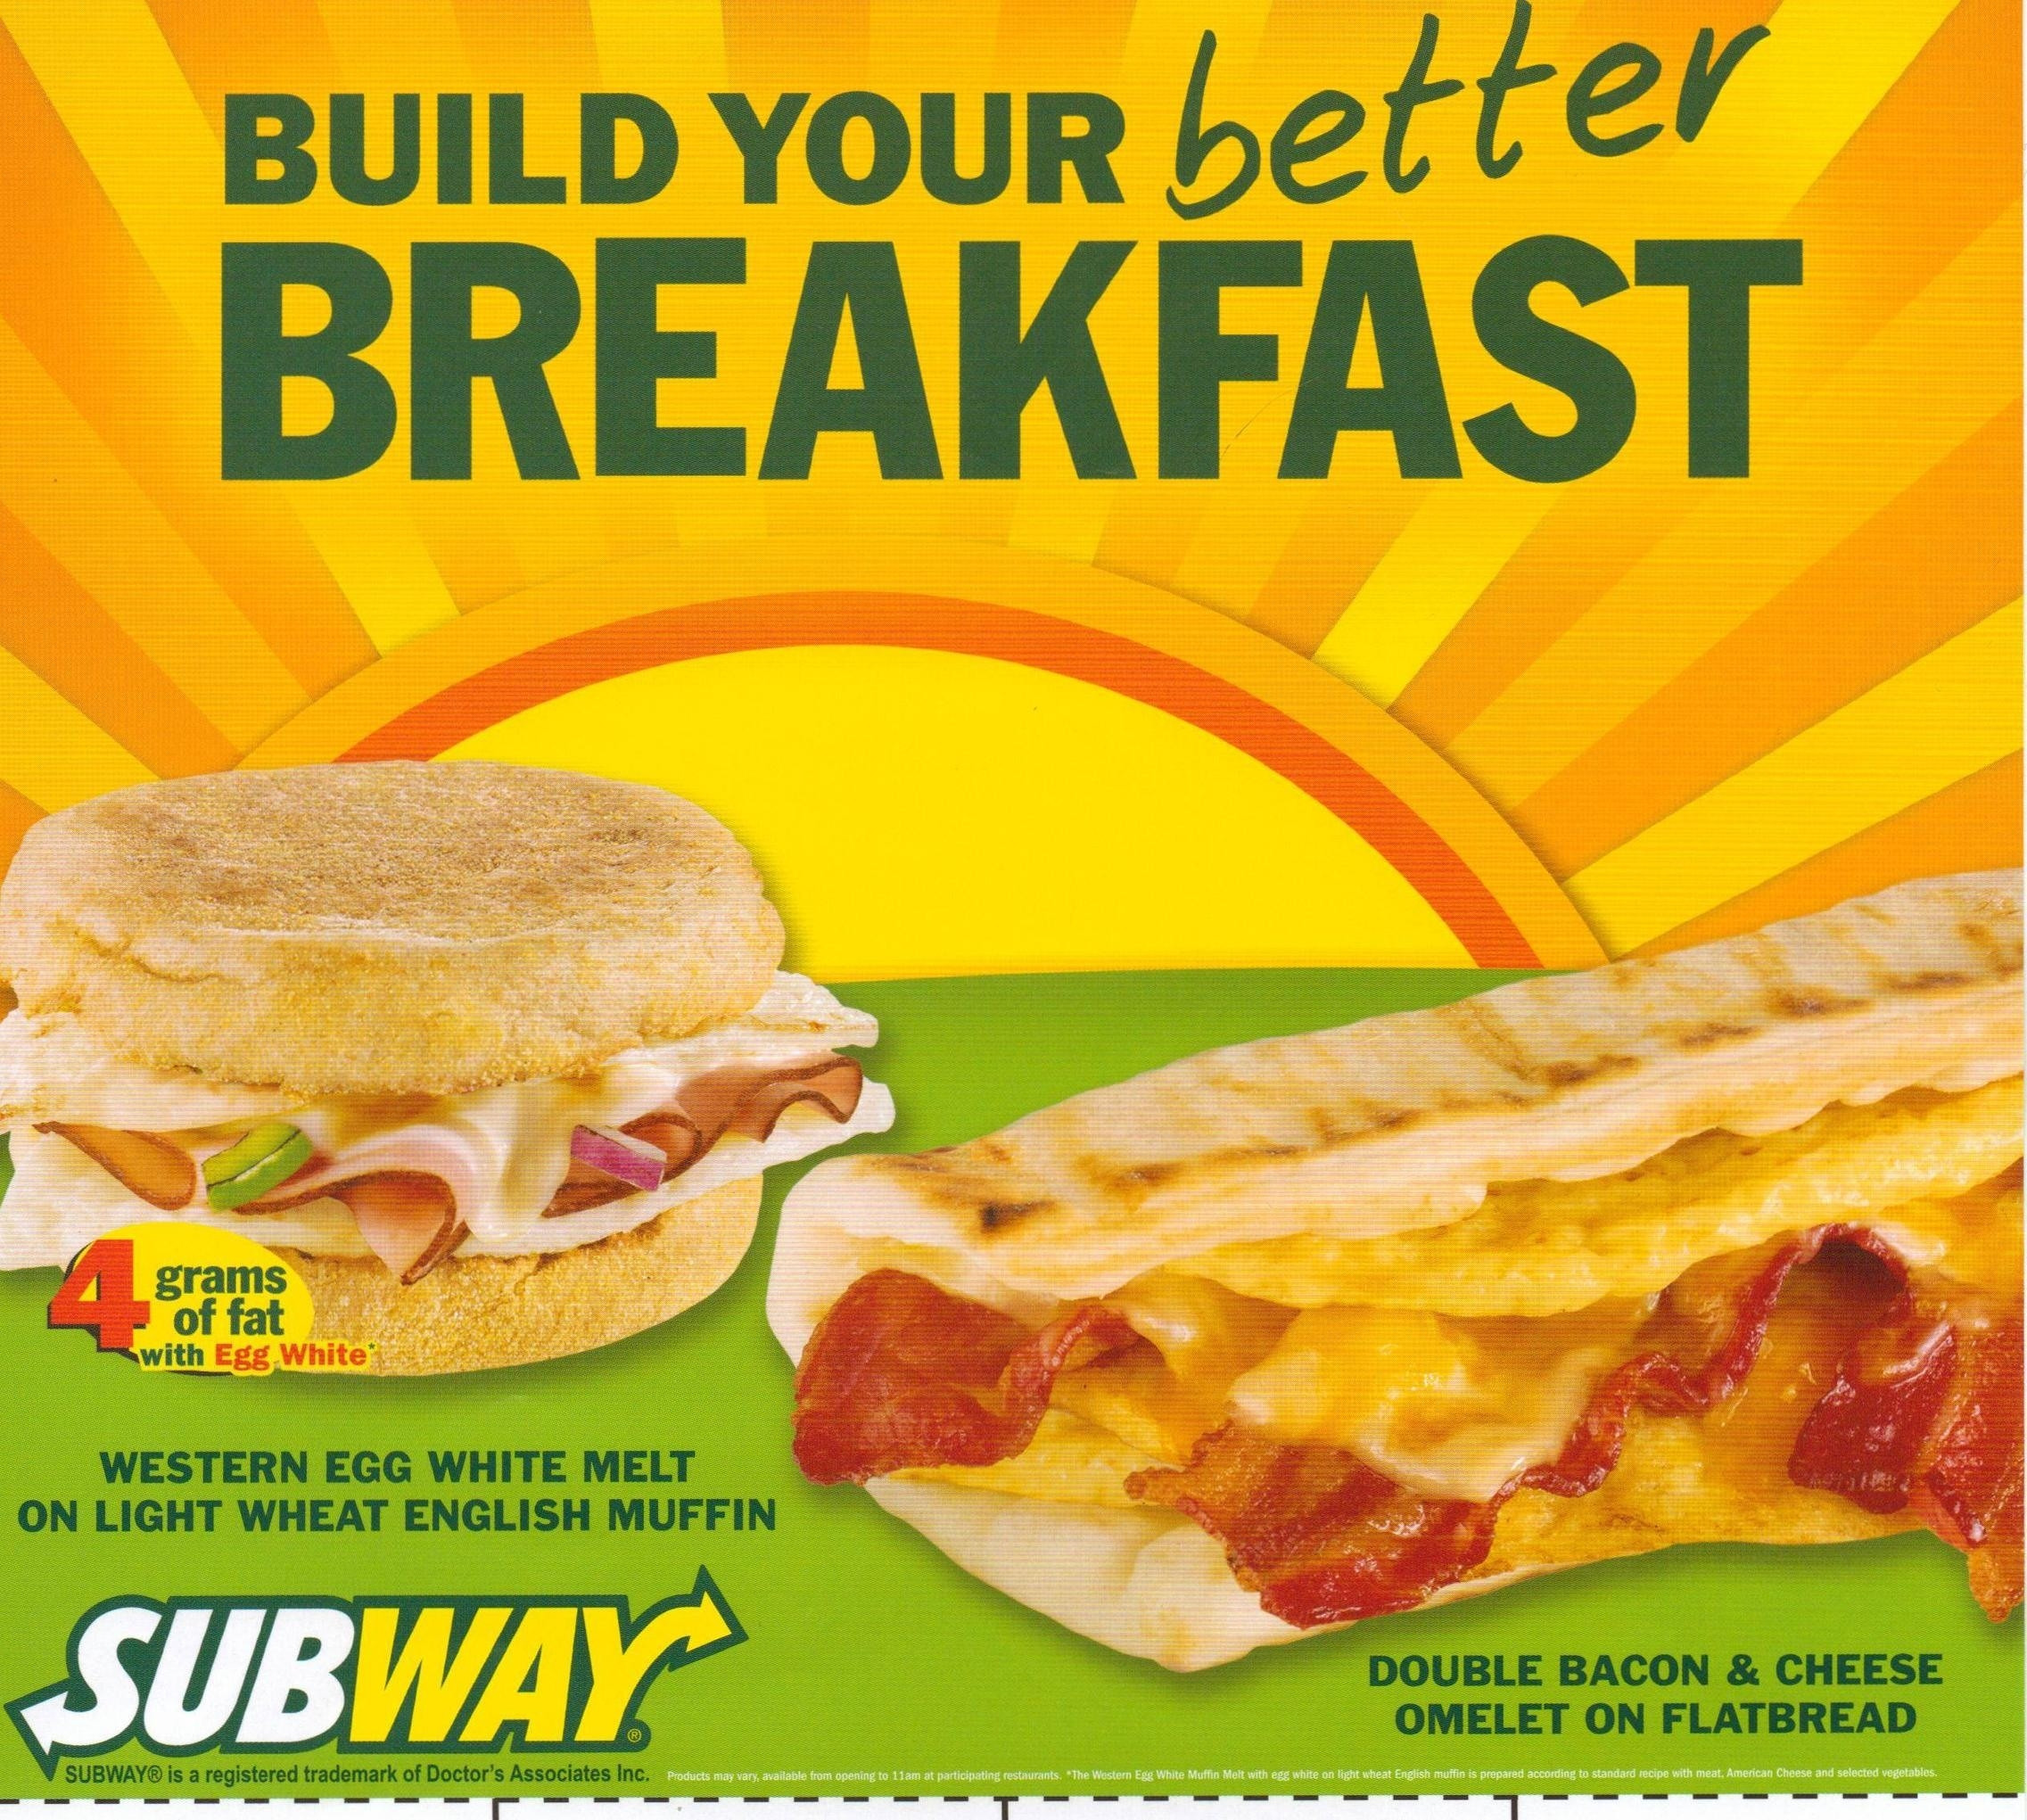 Healthy Subway Breakfast
 11 Reasons Why Subway Is And Will Always Be Jimmy John s